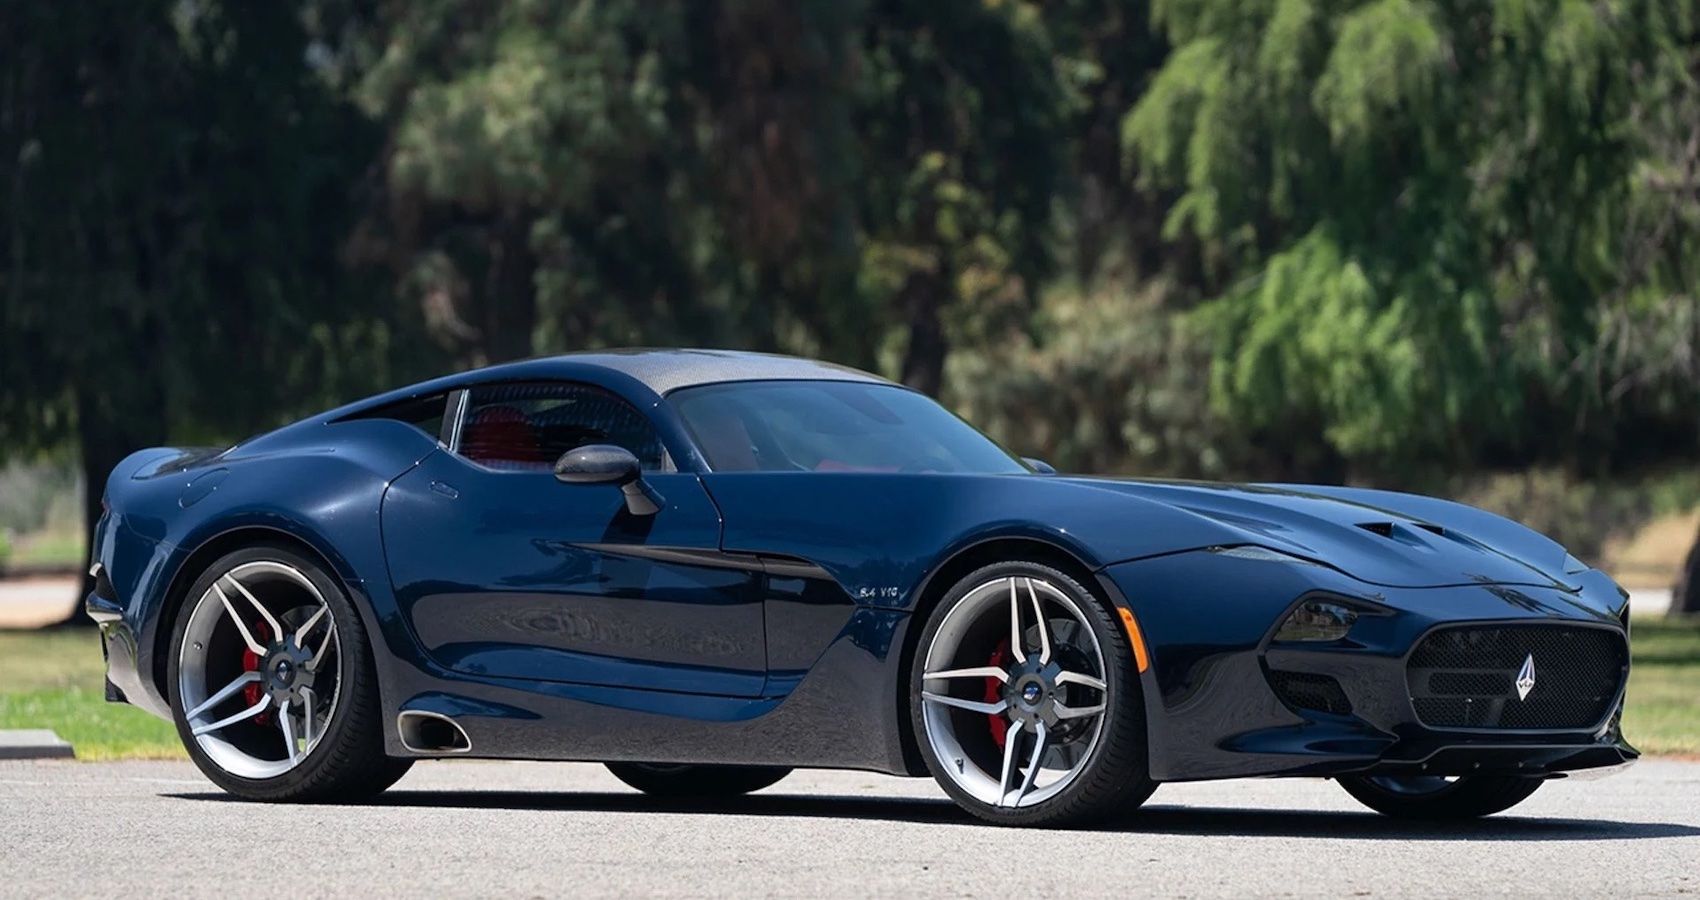 Inspired By The Dodge Viper, The VLF Force 1 V10 Is A Beastly American Sports Car